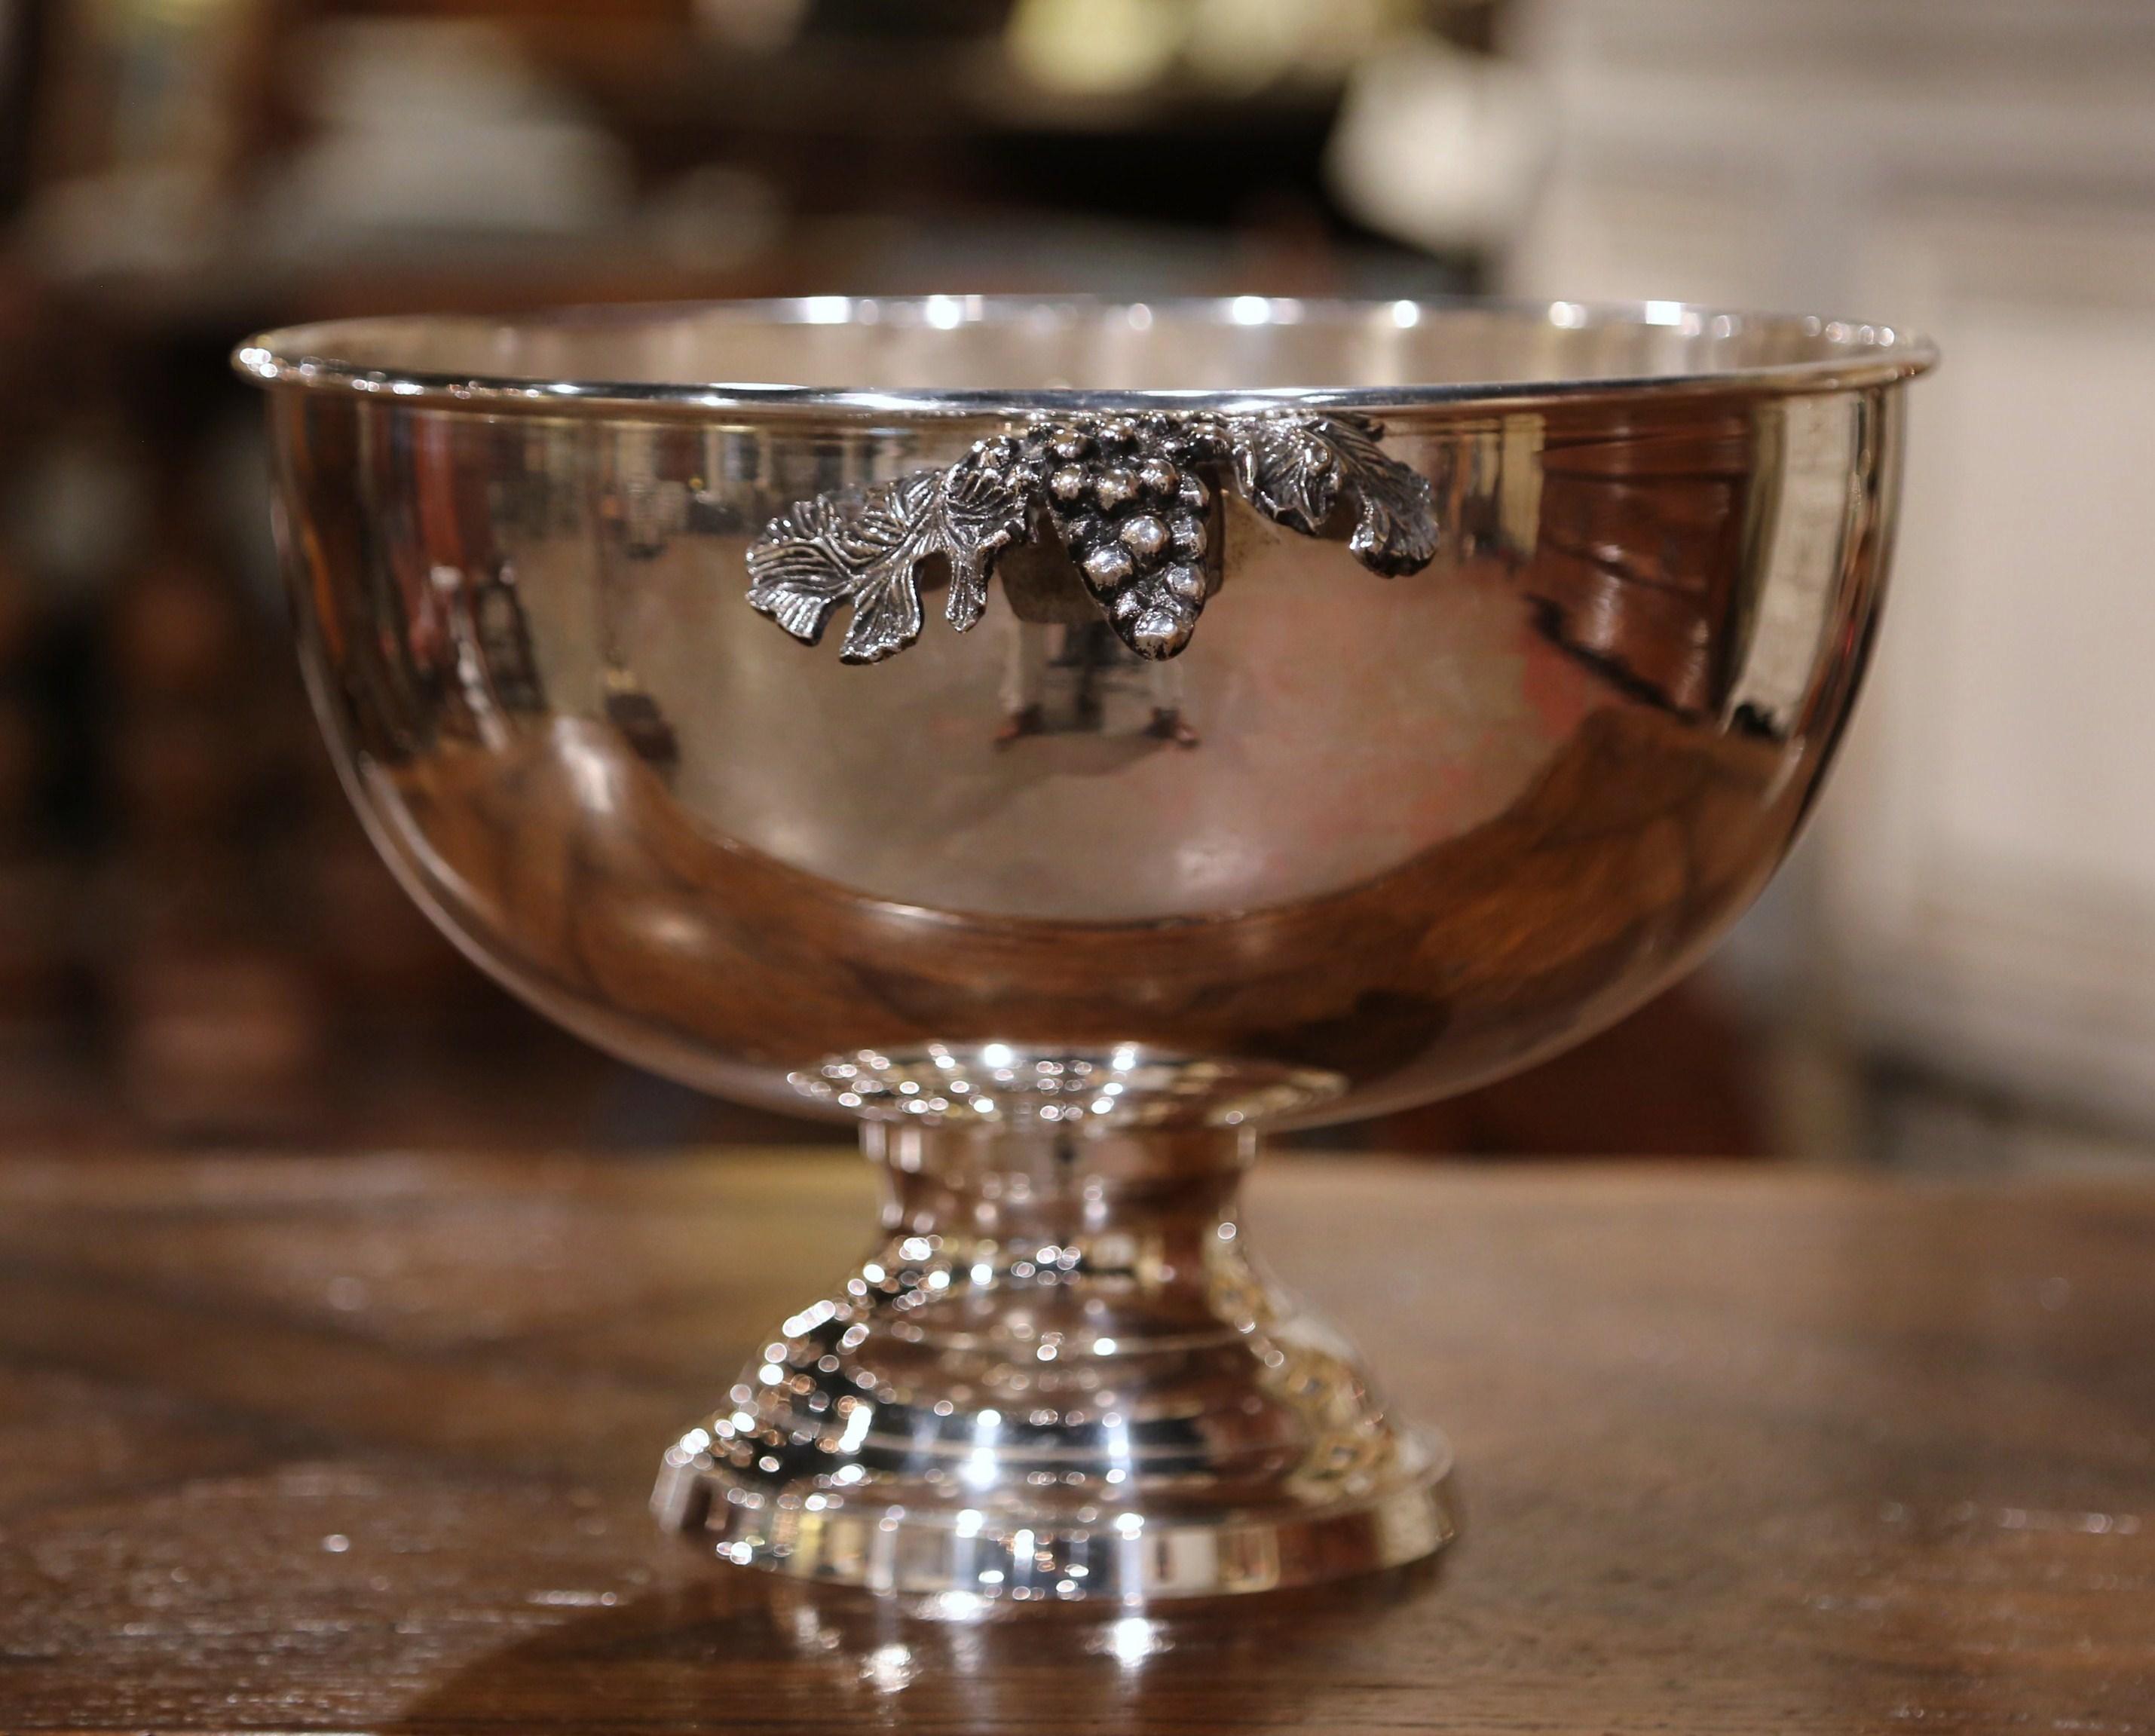 Keep your wine or champagne chilled in style with this elegant round bowl; crafted in France circa 1970 and made of silver plated over brass, the circular bowl stands on a round base; it features intricate decorative handles with grapes and leaves